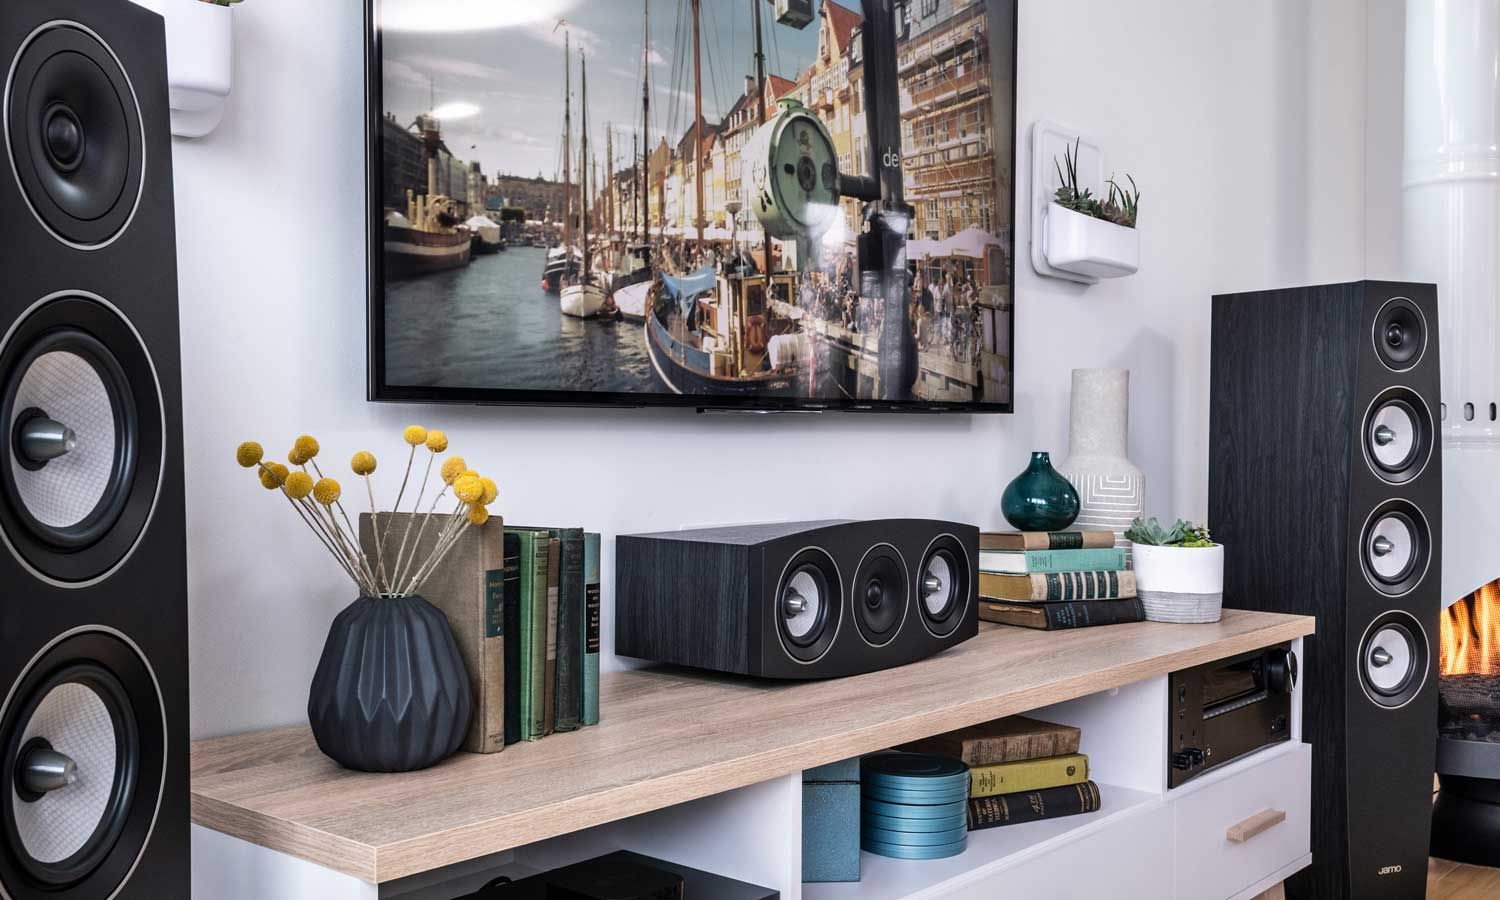 klipsch speakers in a room with a tv on the wall